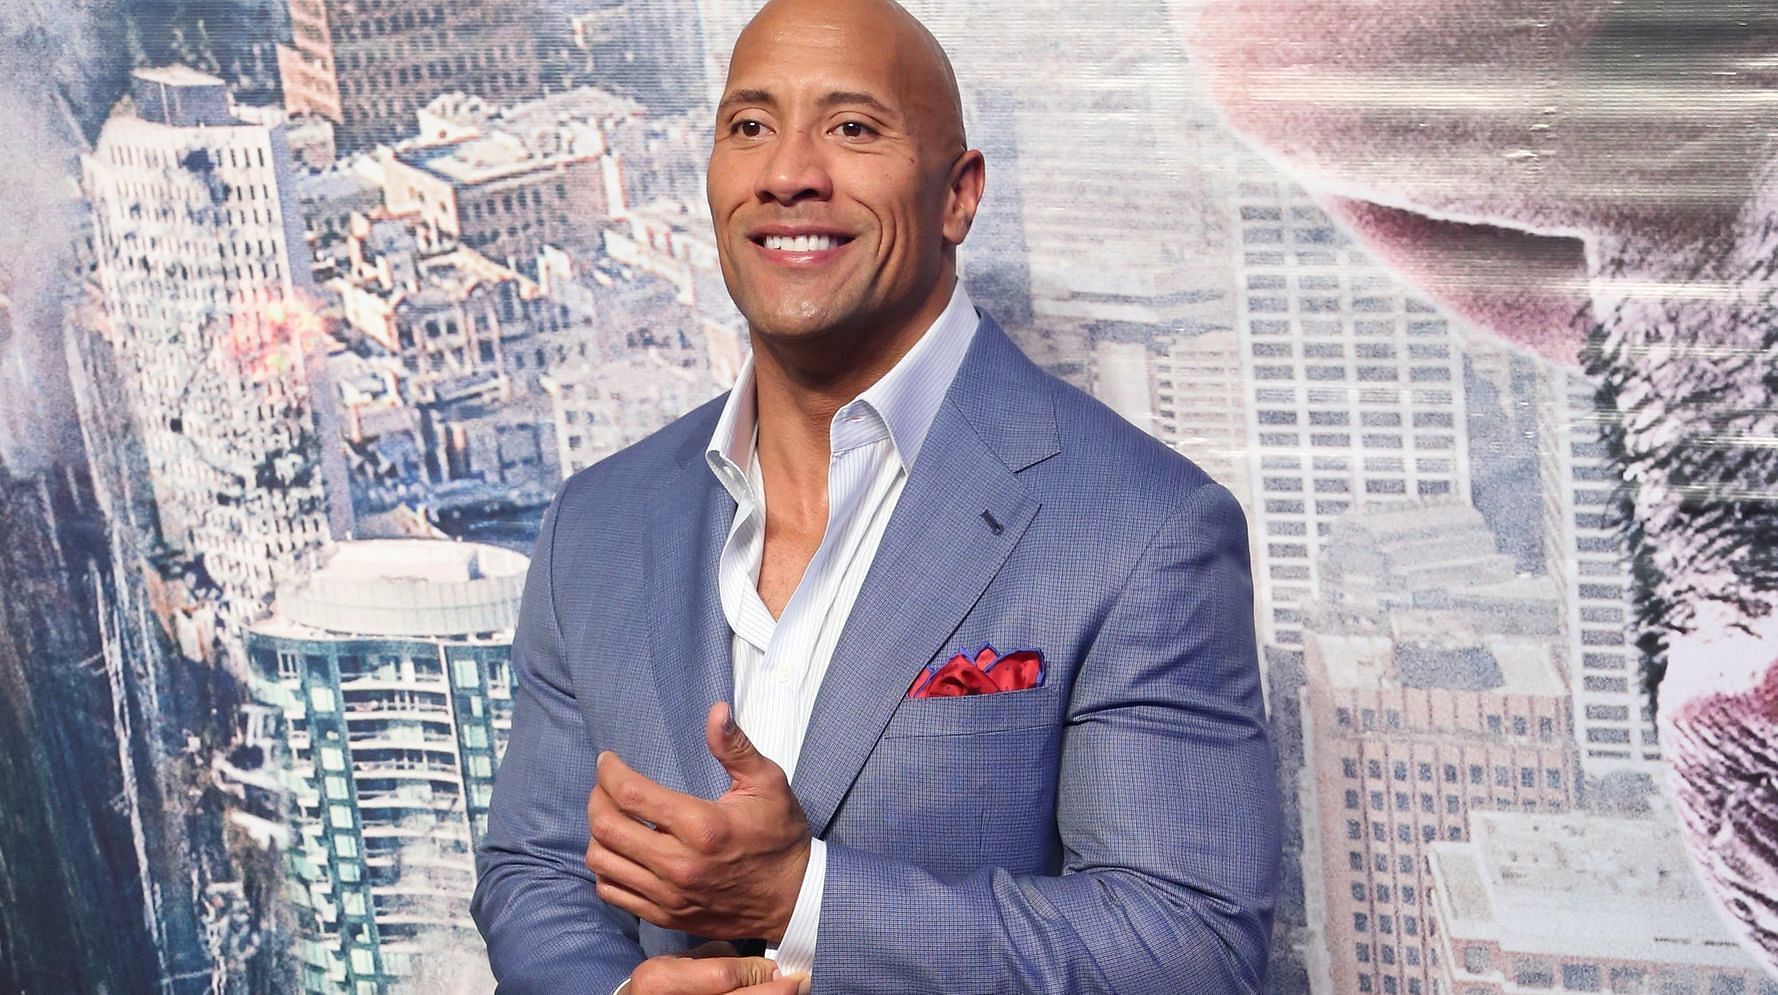 The Rock discussed running for US President!